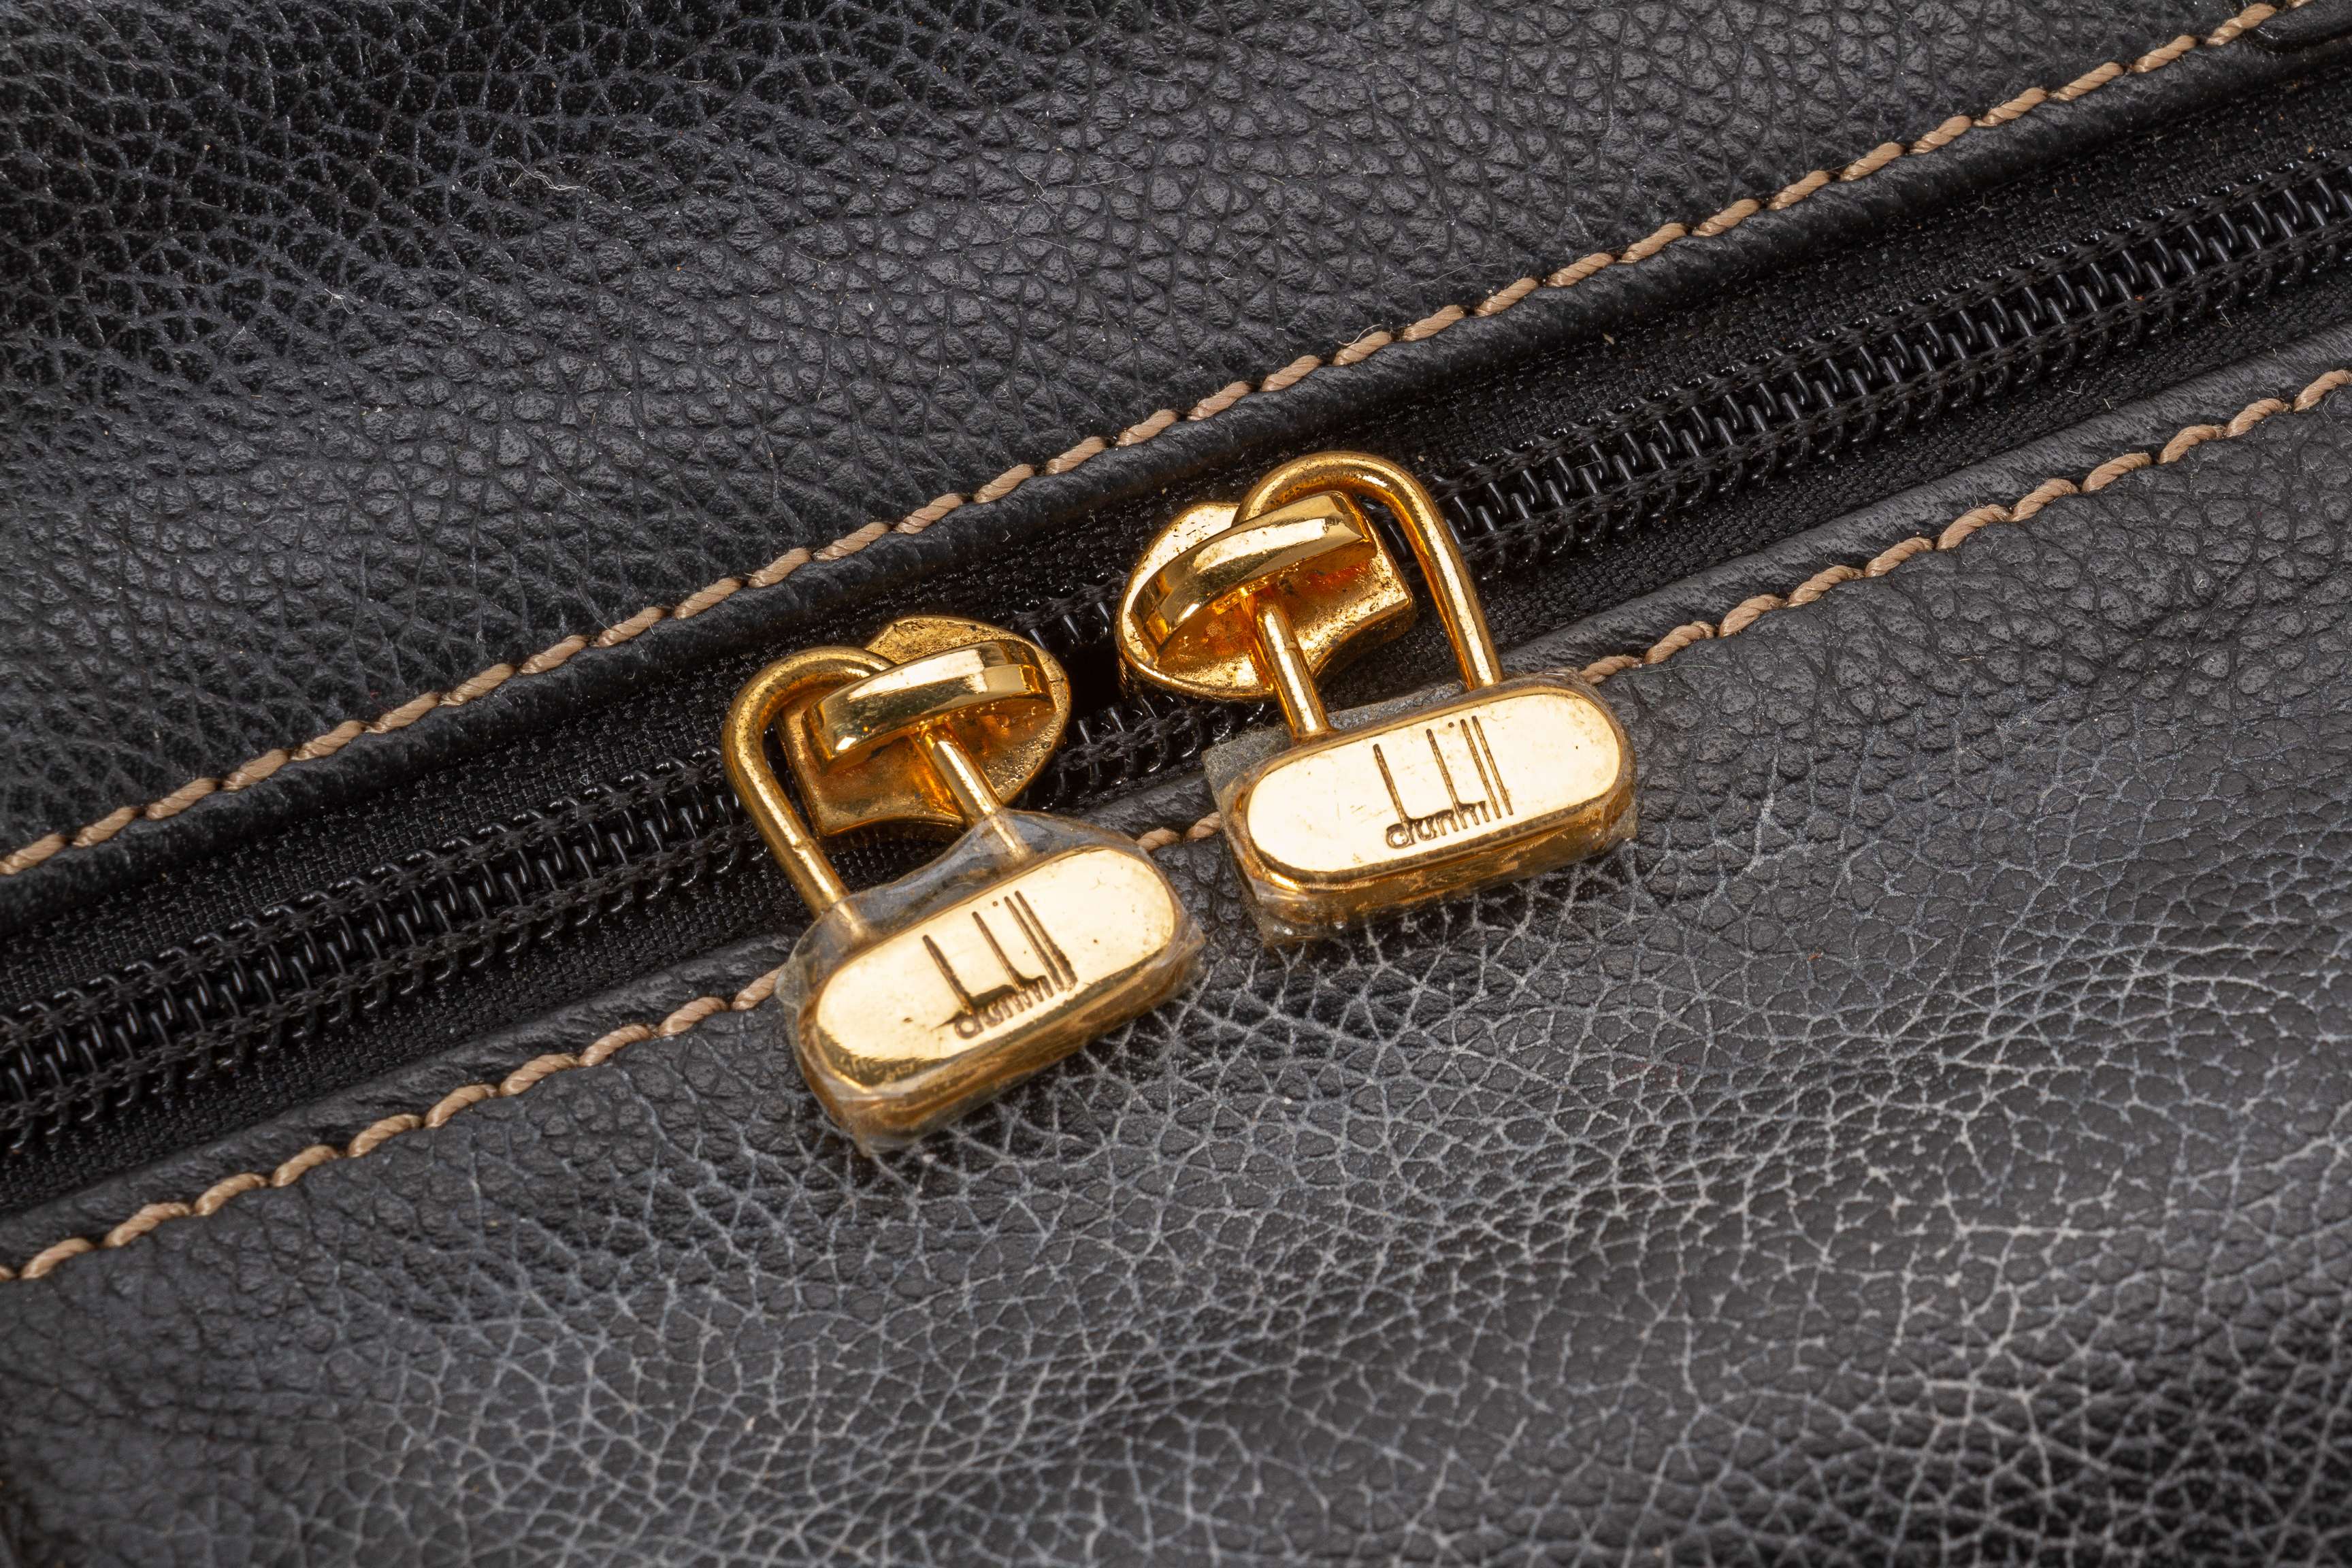 TWO DUNHILL LEATHER HOLDALLS - Image 8 of 9